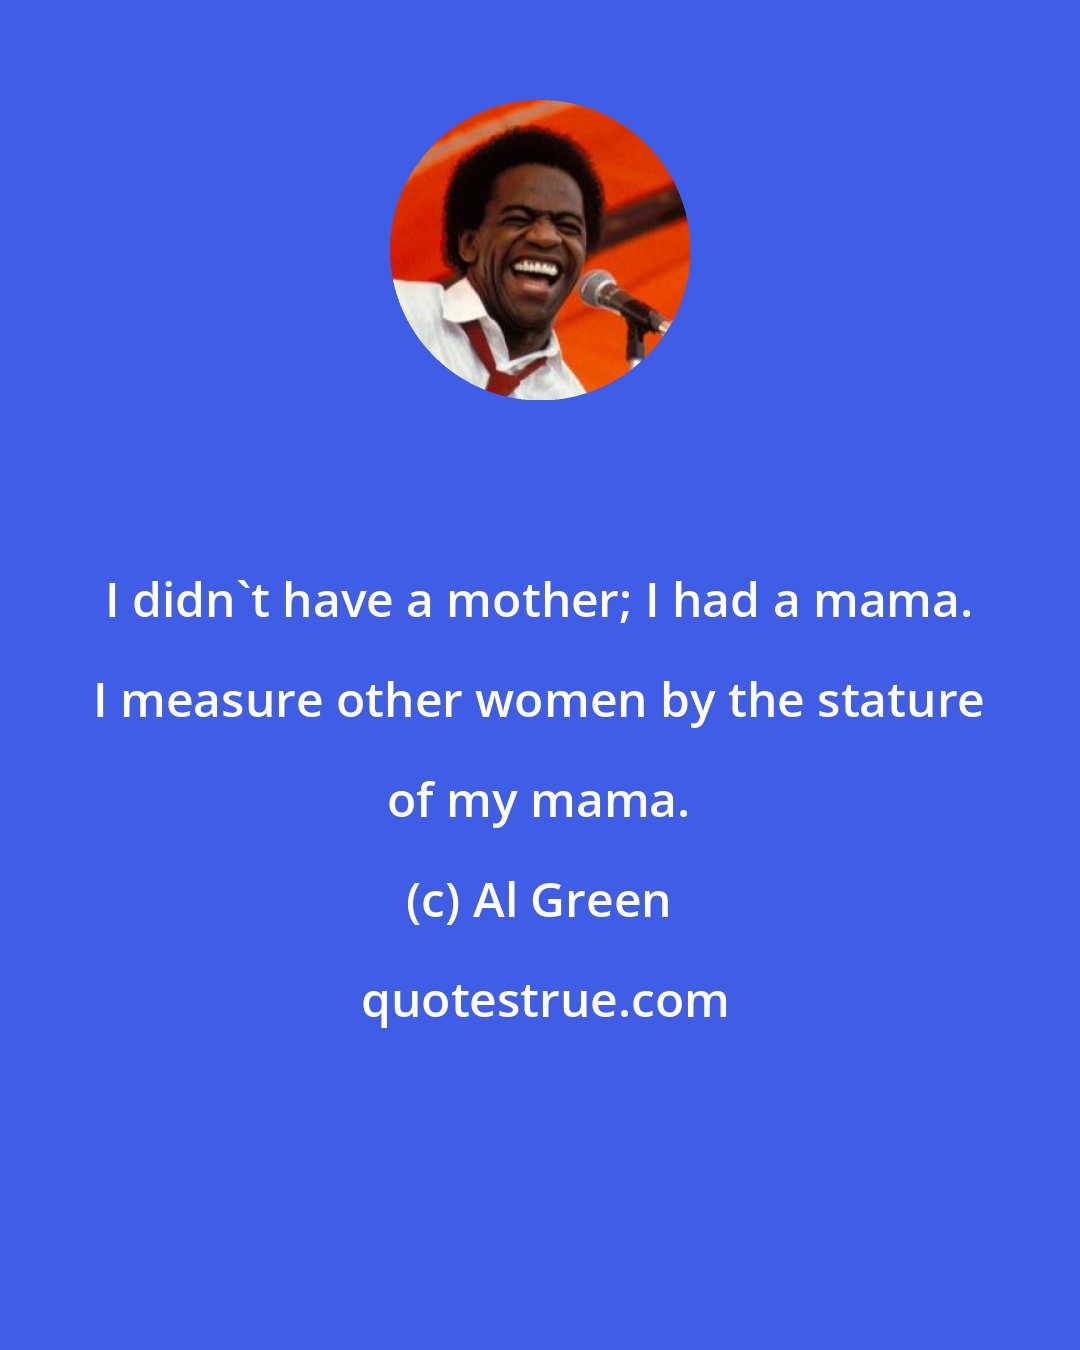 Al Green: I didn't have a mother; I had a mama. I measure other women by the stature of my mama.